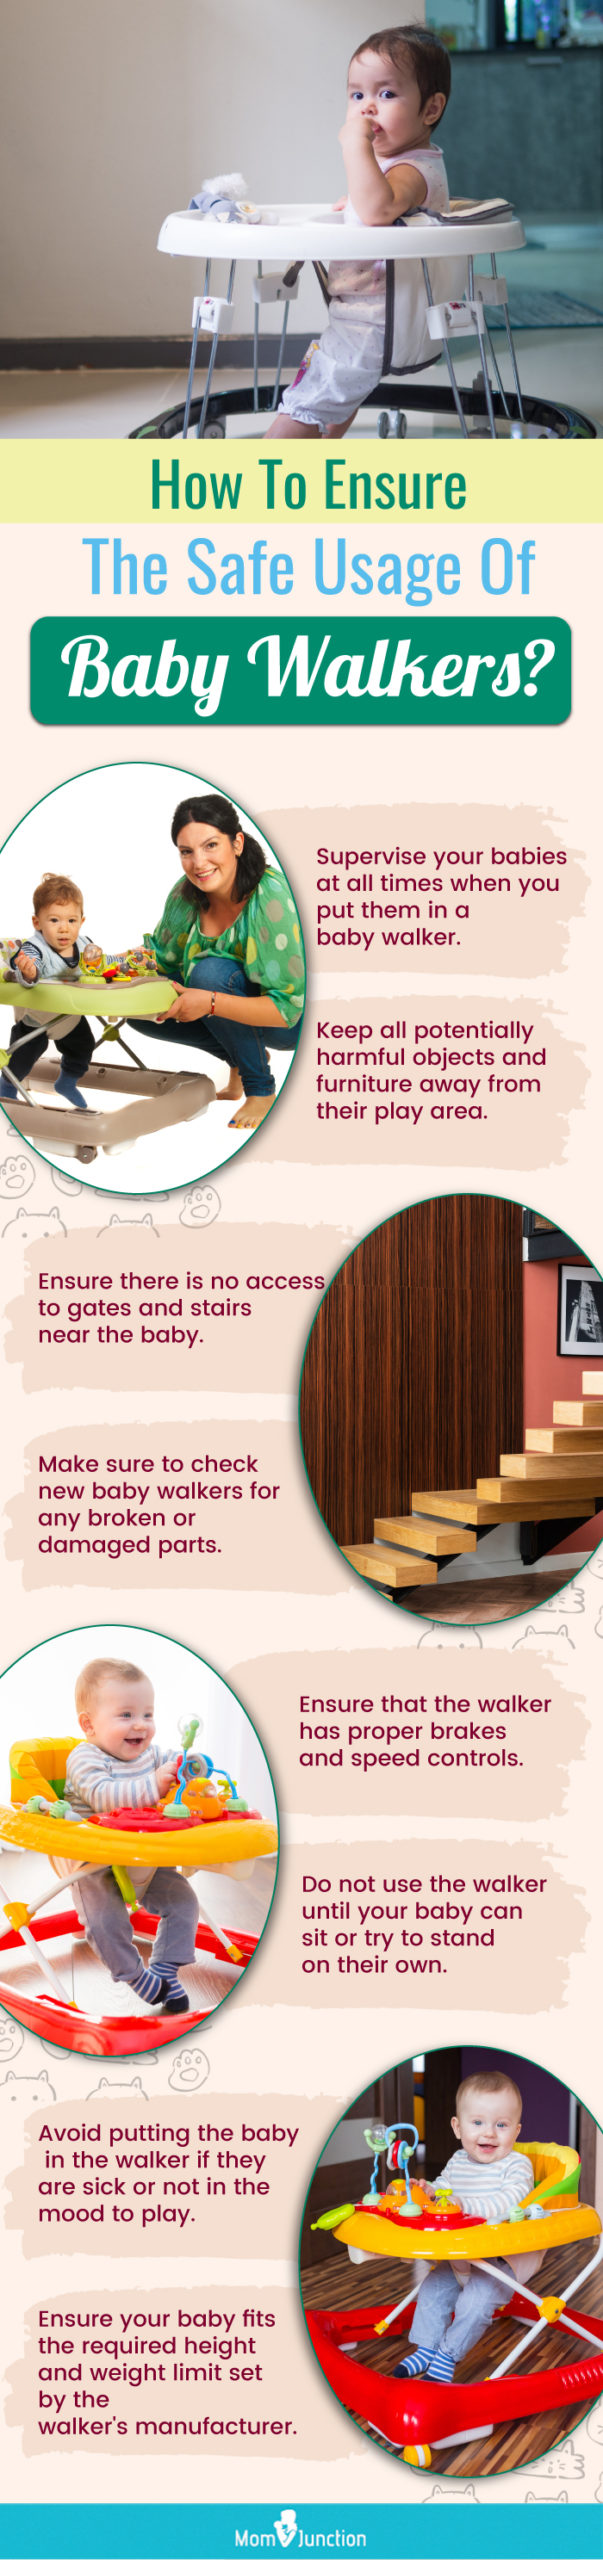 How To Ensure The Safe Usage Of Baby Walkers? (infographic)